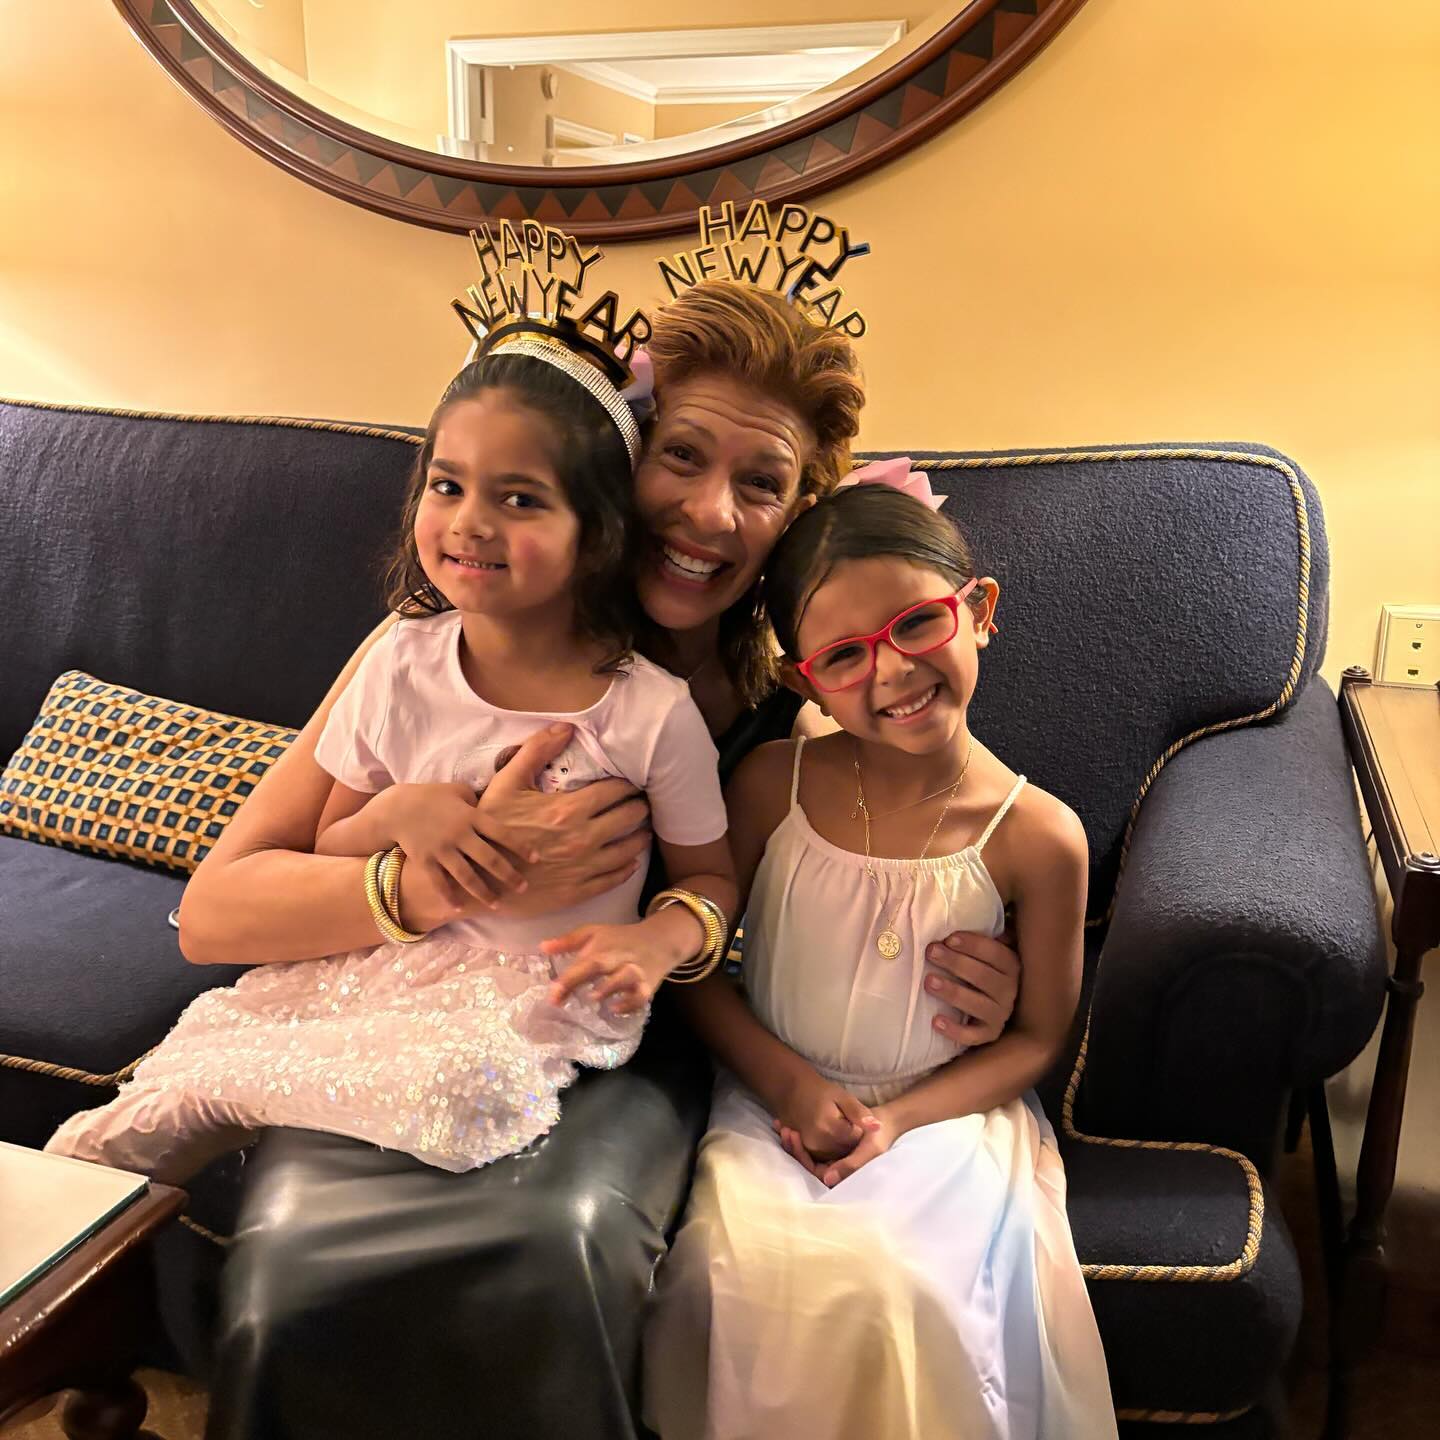 Hoda's adoptive daughter, Hope, was hospitalized last year for nearly a week in the ICU